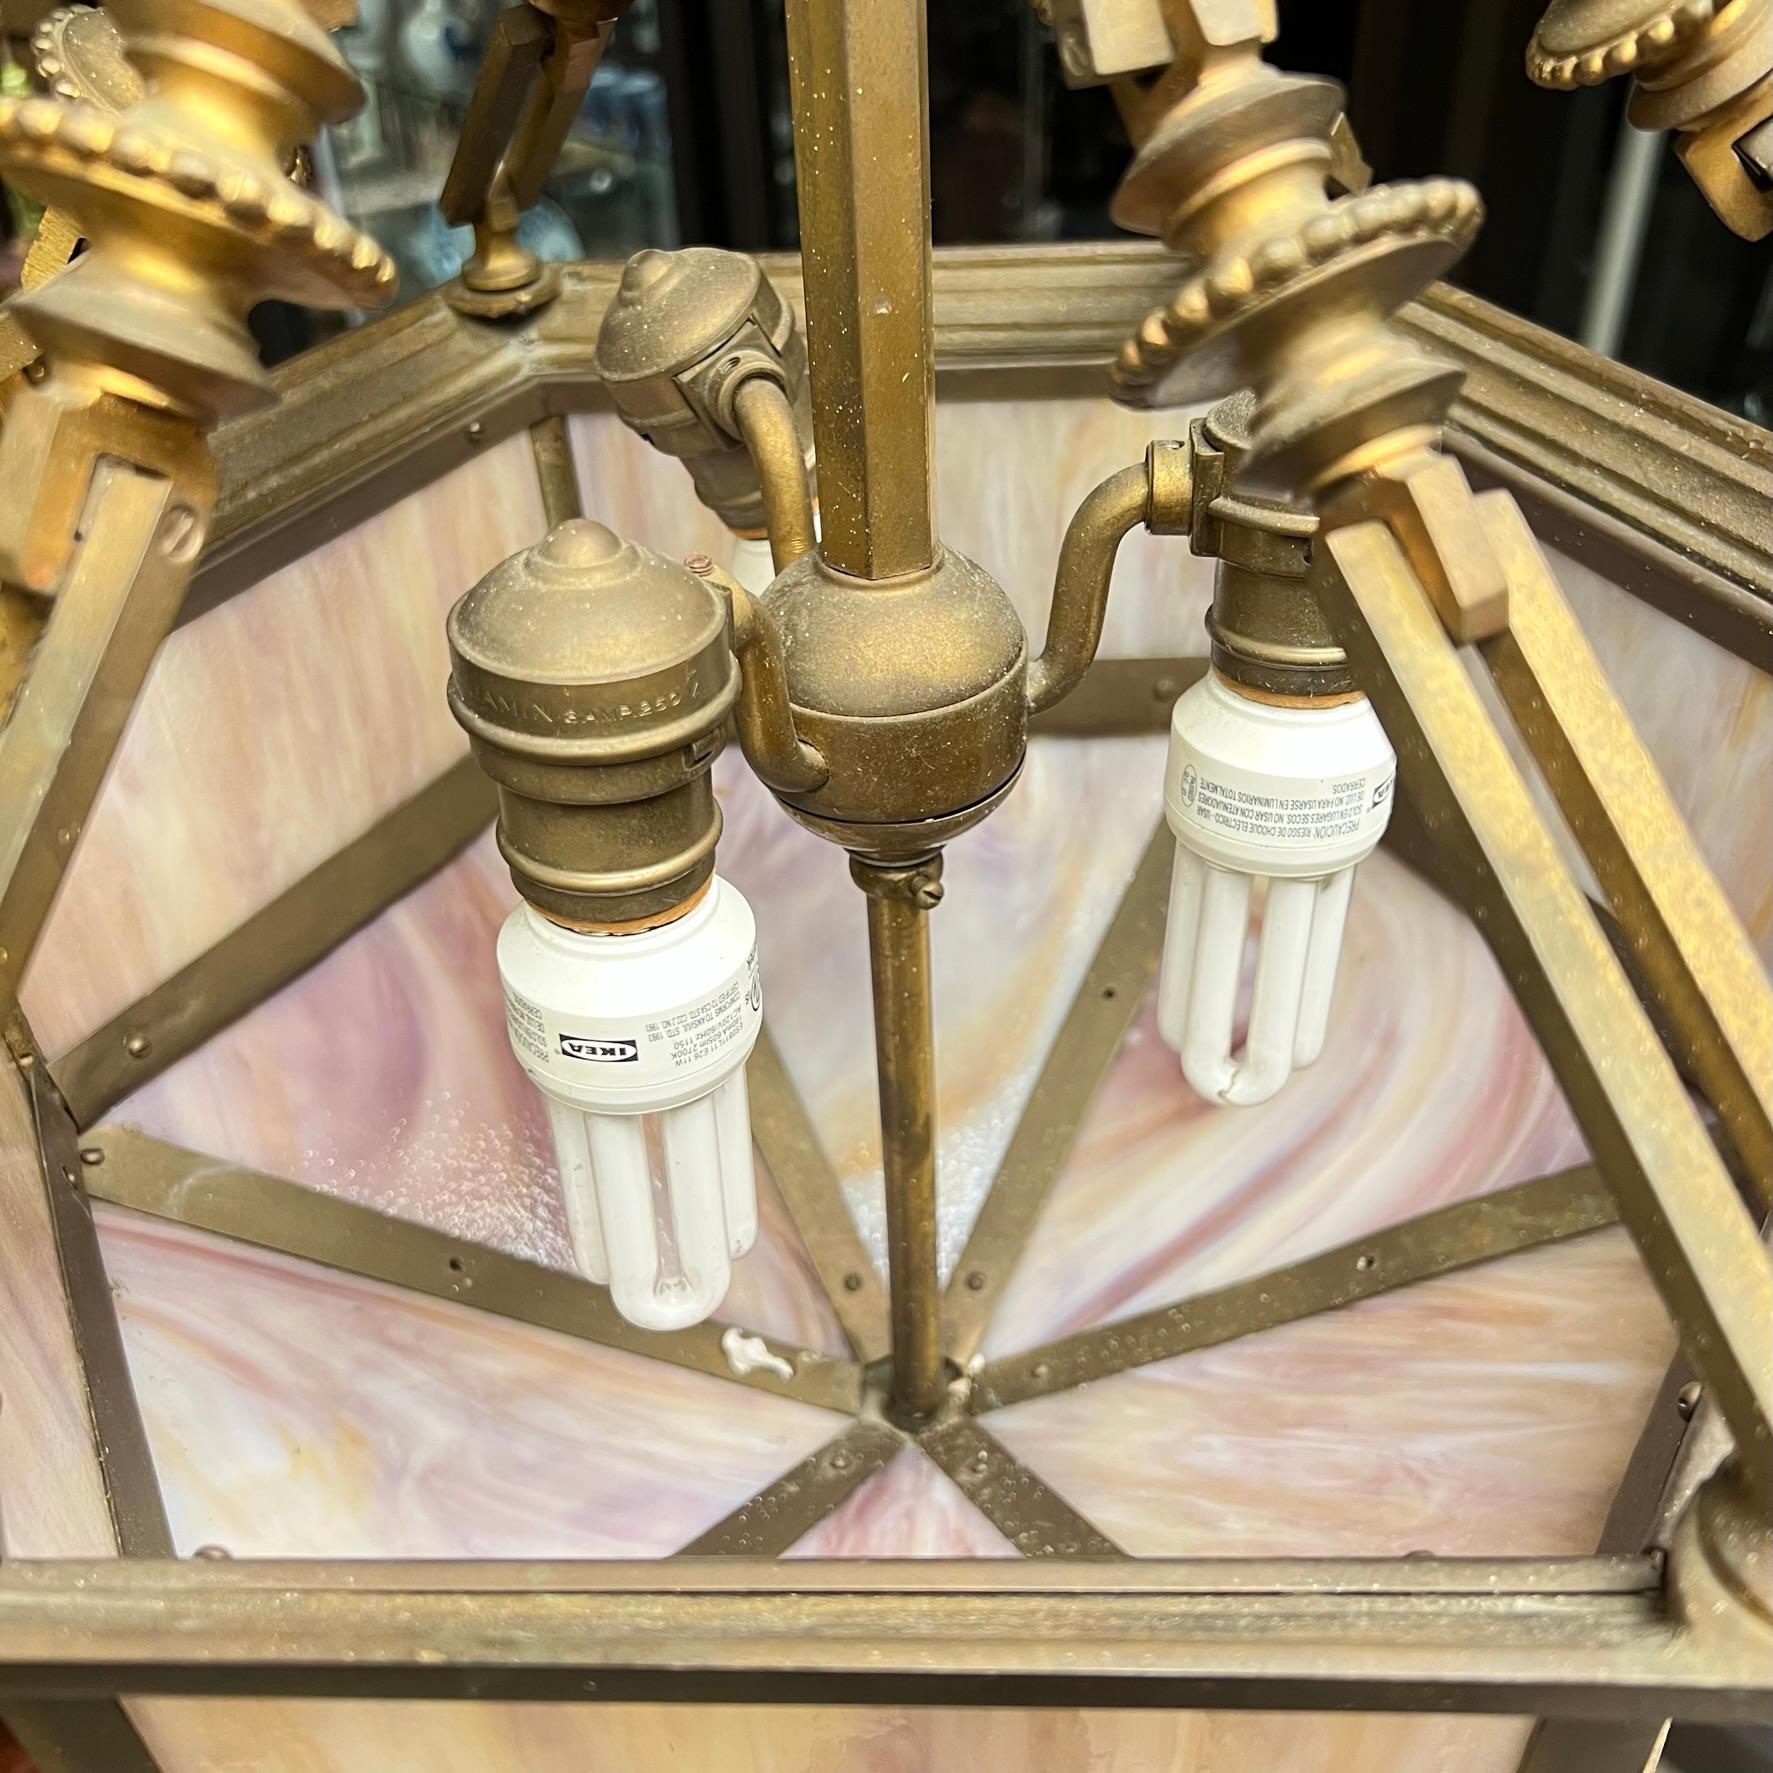 Very fine quality French  hanging lamp in the Arts and Crafts style with hexagonal shape and slag glass in shades of pink.  With three working sockets and wiring, ready for use.